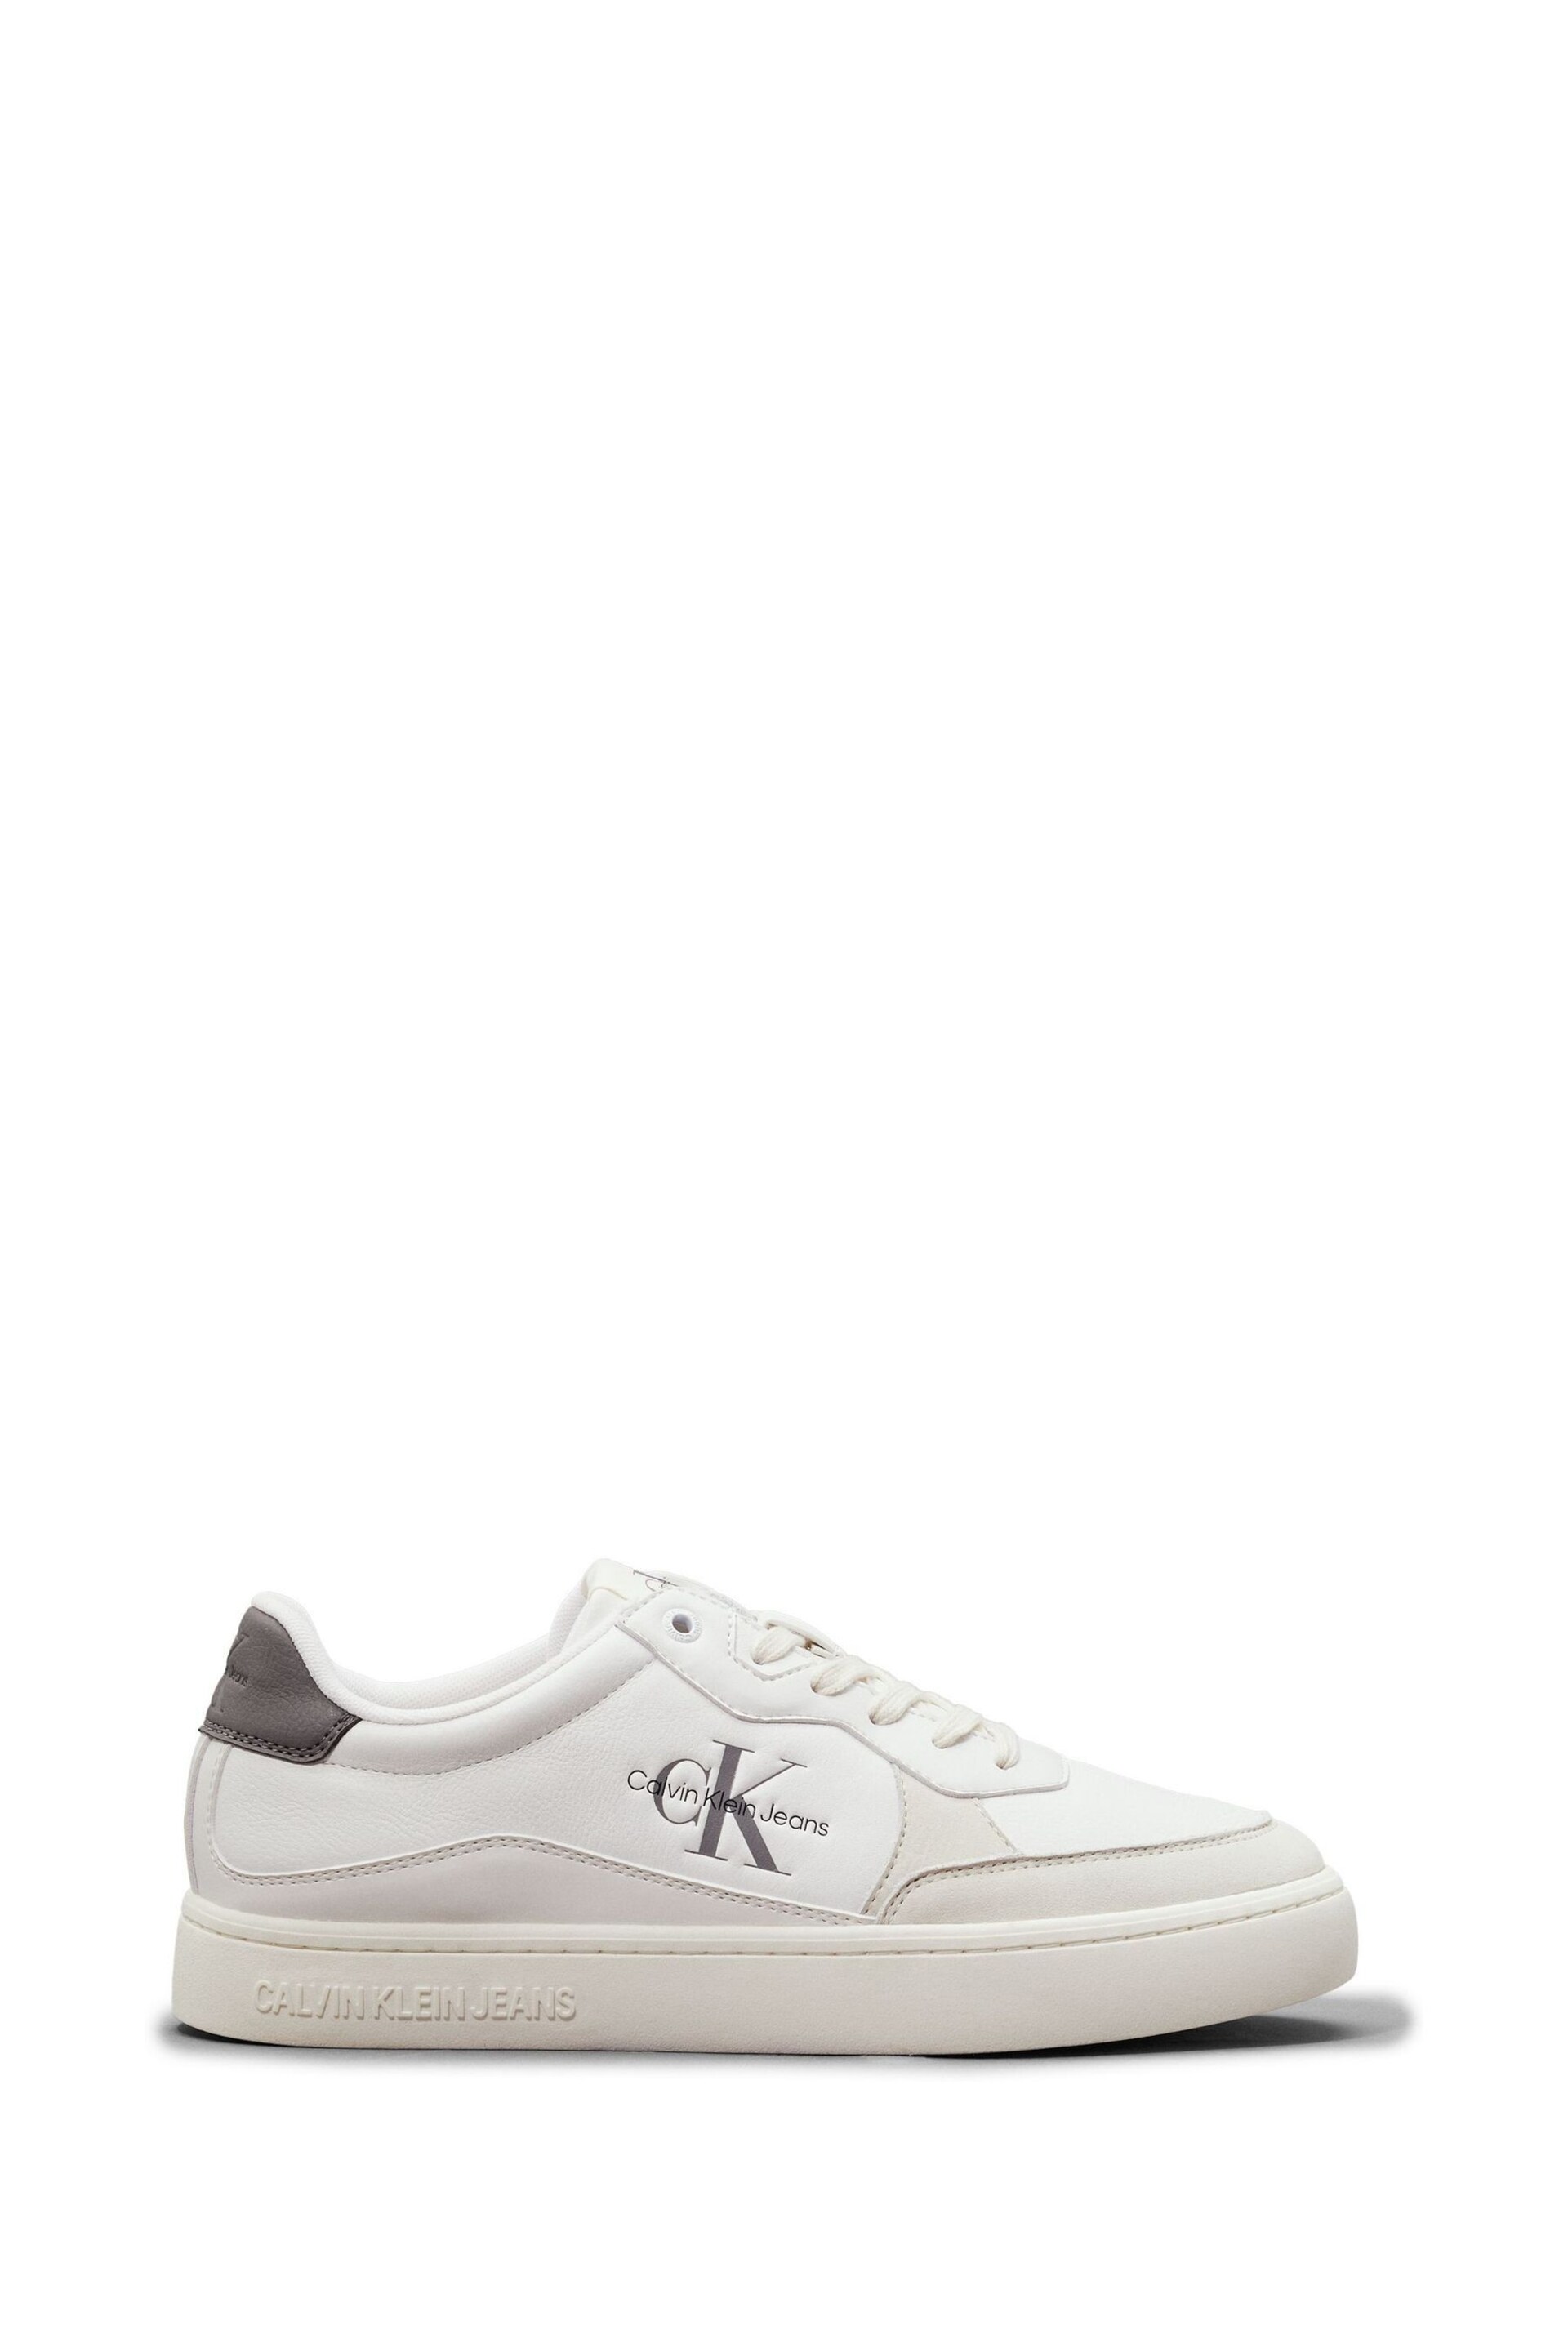 Calvin Klein Grey Classic Cupsole Low Lace-Up Trainers - Image 1 of 5